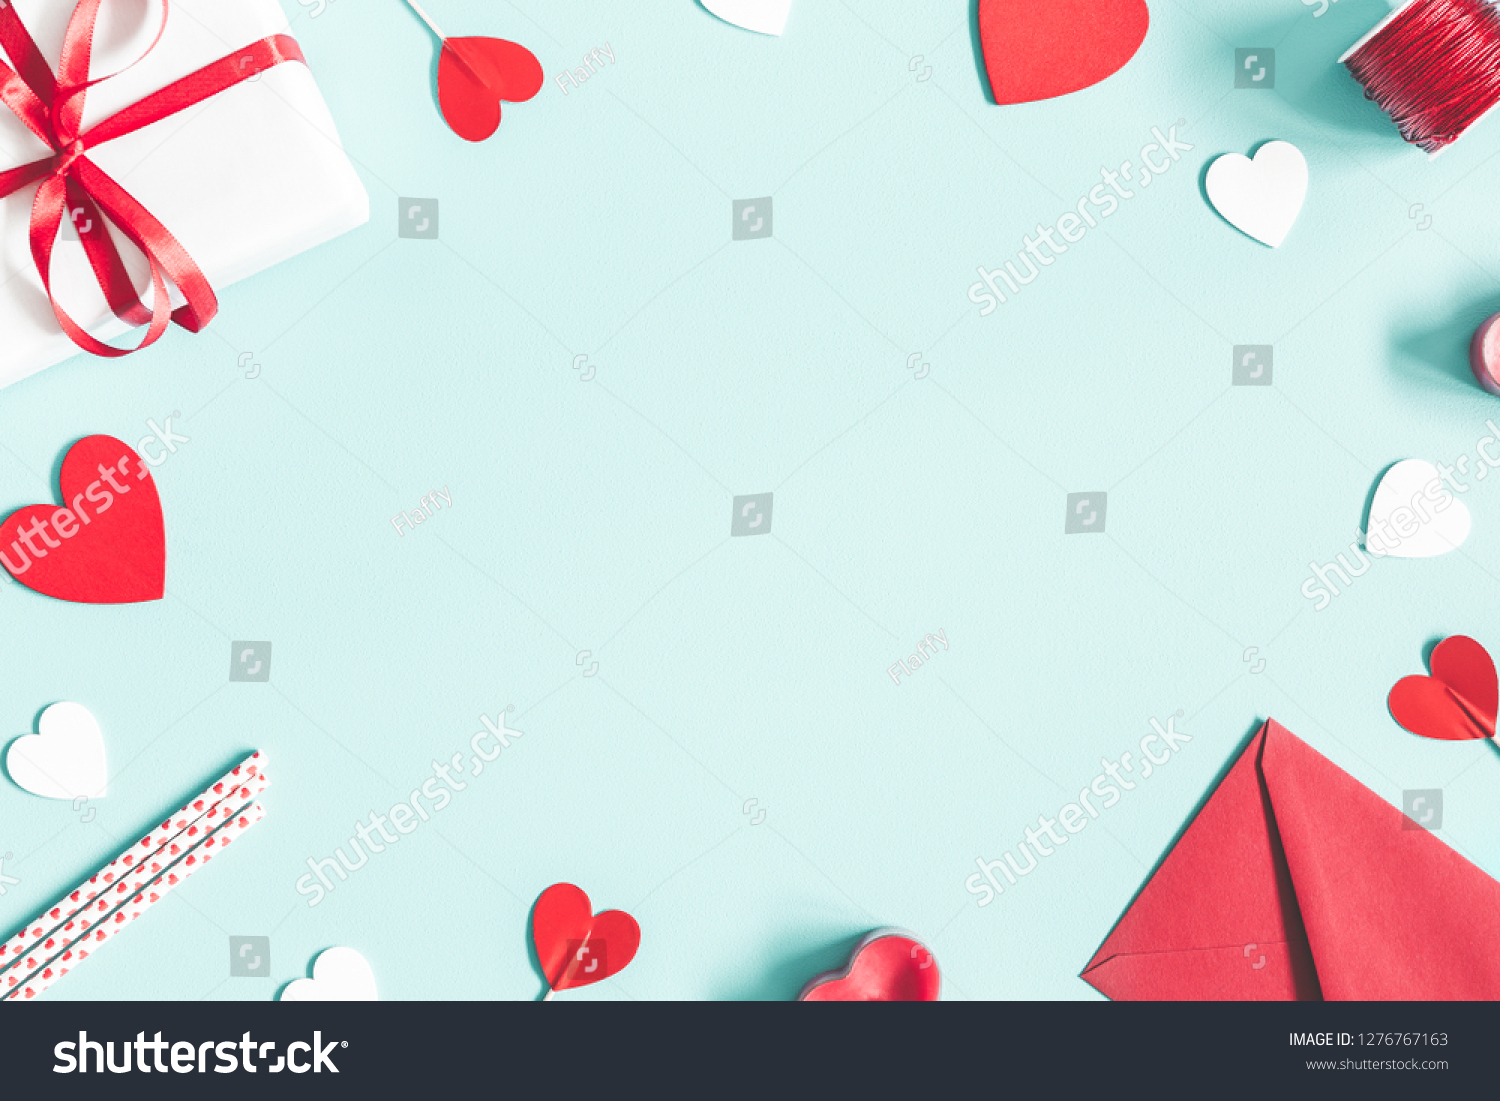 Valentine's Day background. Gifts, candle, confetti, envelope on pastel blue background. Valentines day concept. Flat lay, top view, copy space #1276767163